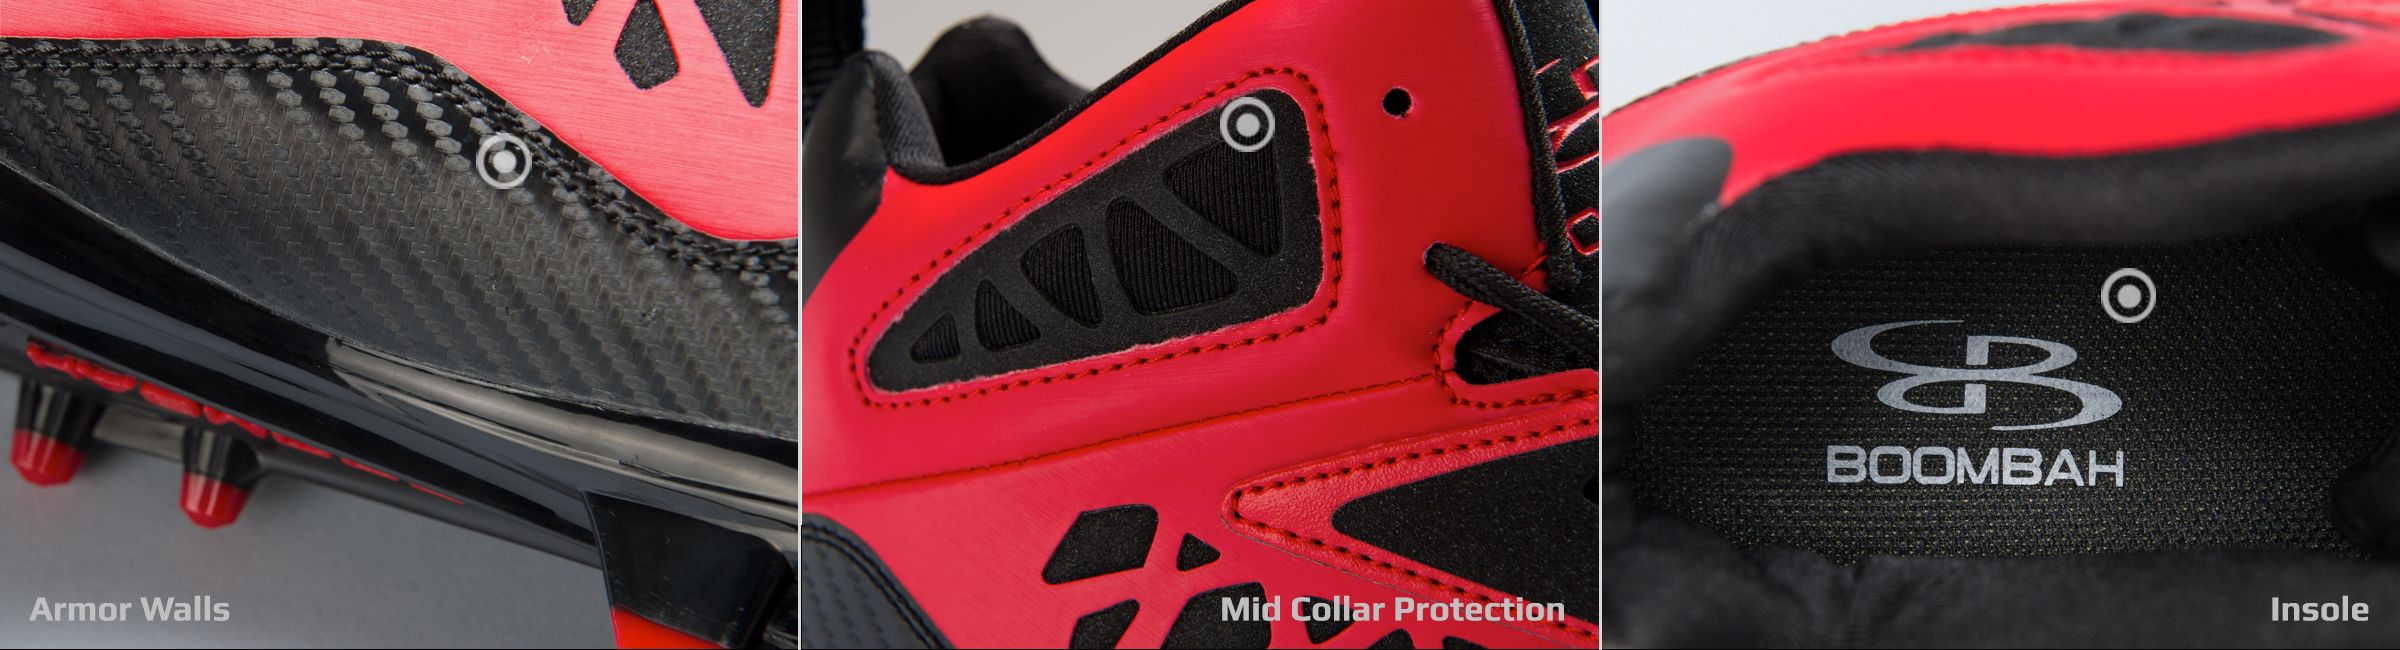 Boombah Gamma Burst Molded Football Cleat Details